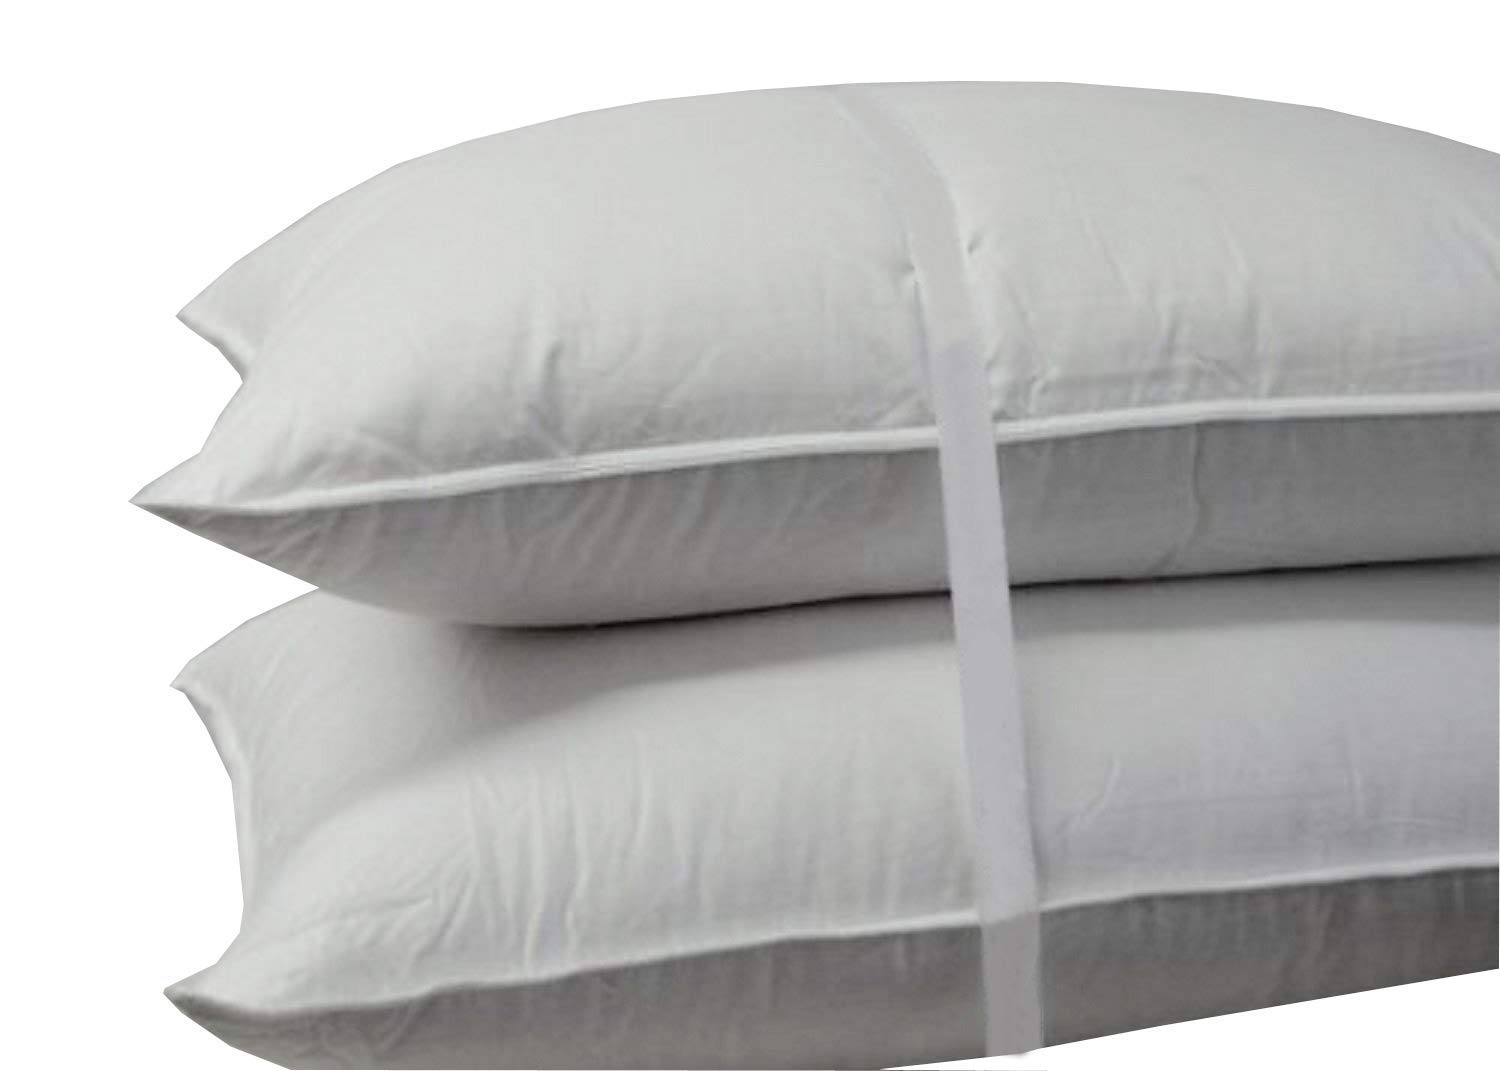 Royal Hotel's Down Pillow - 500 Thread Count 100% Cotton, Down, King Size, Firm, Set of 2